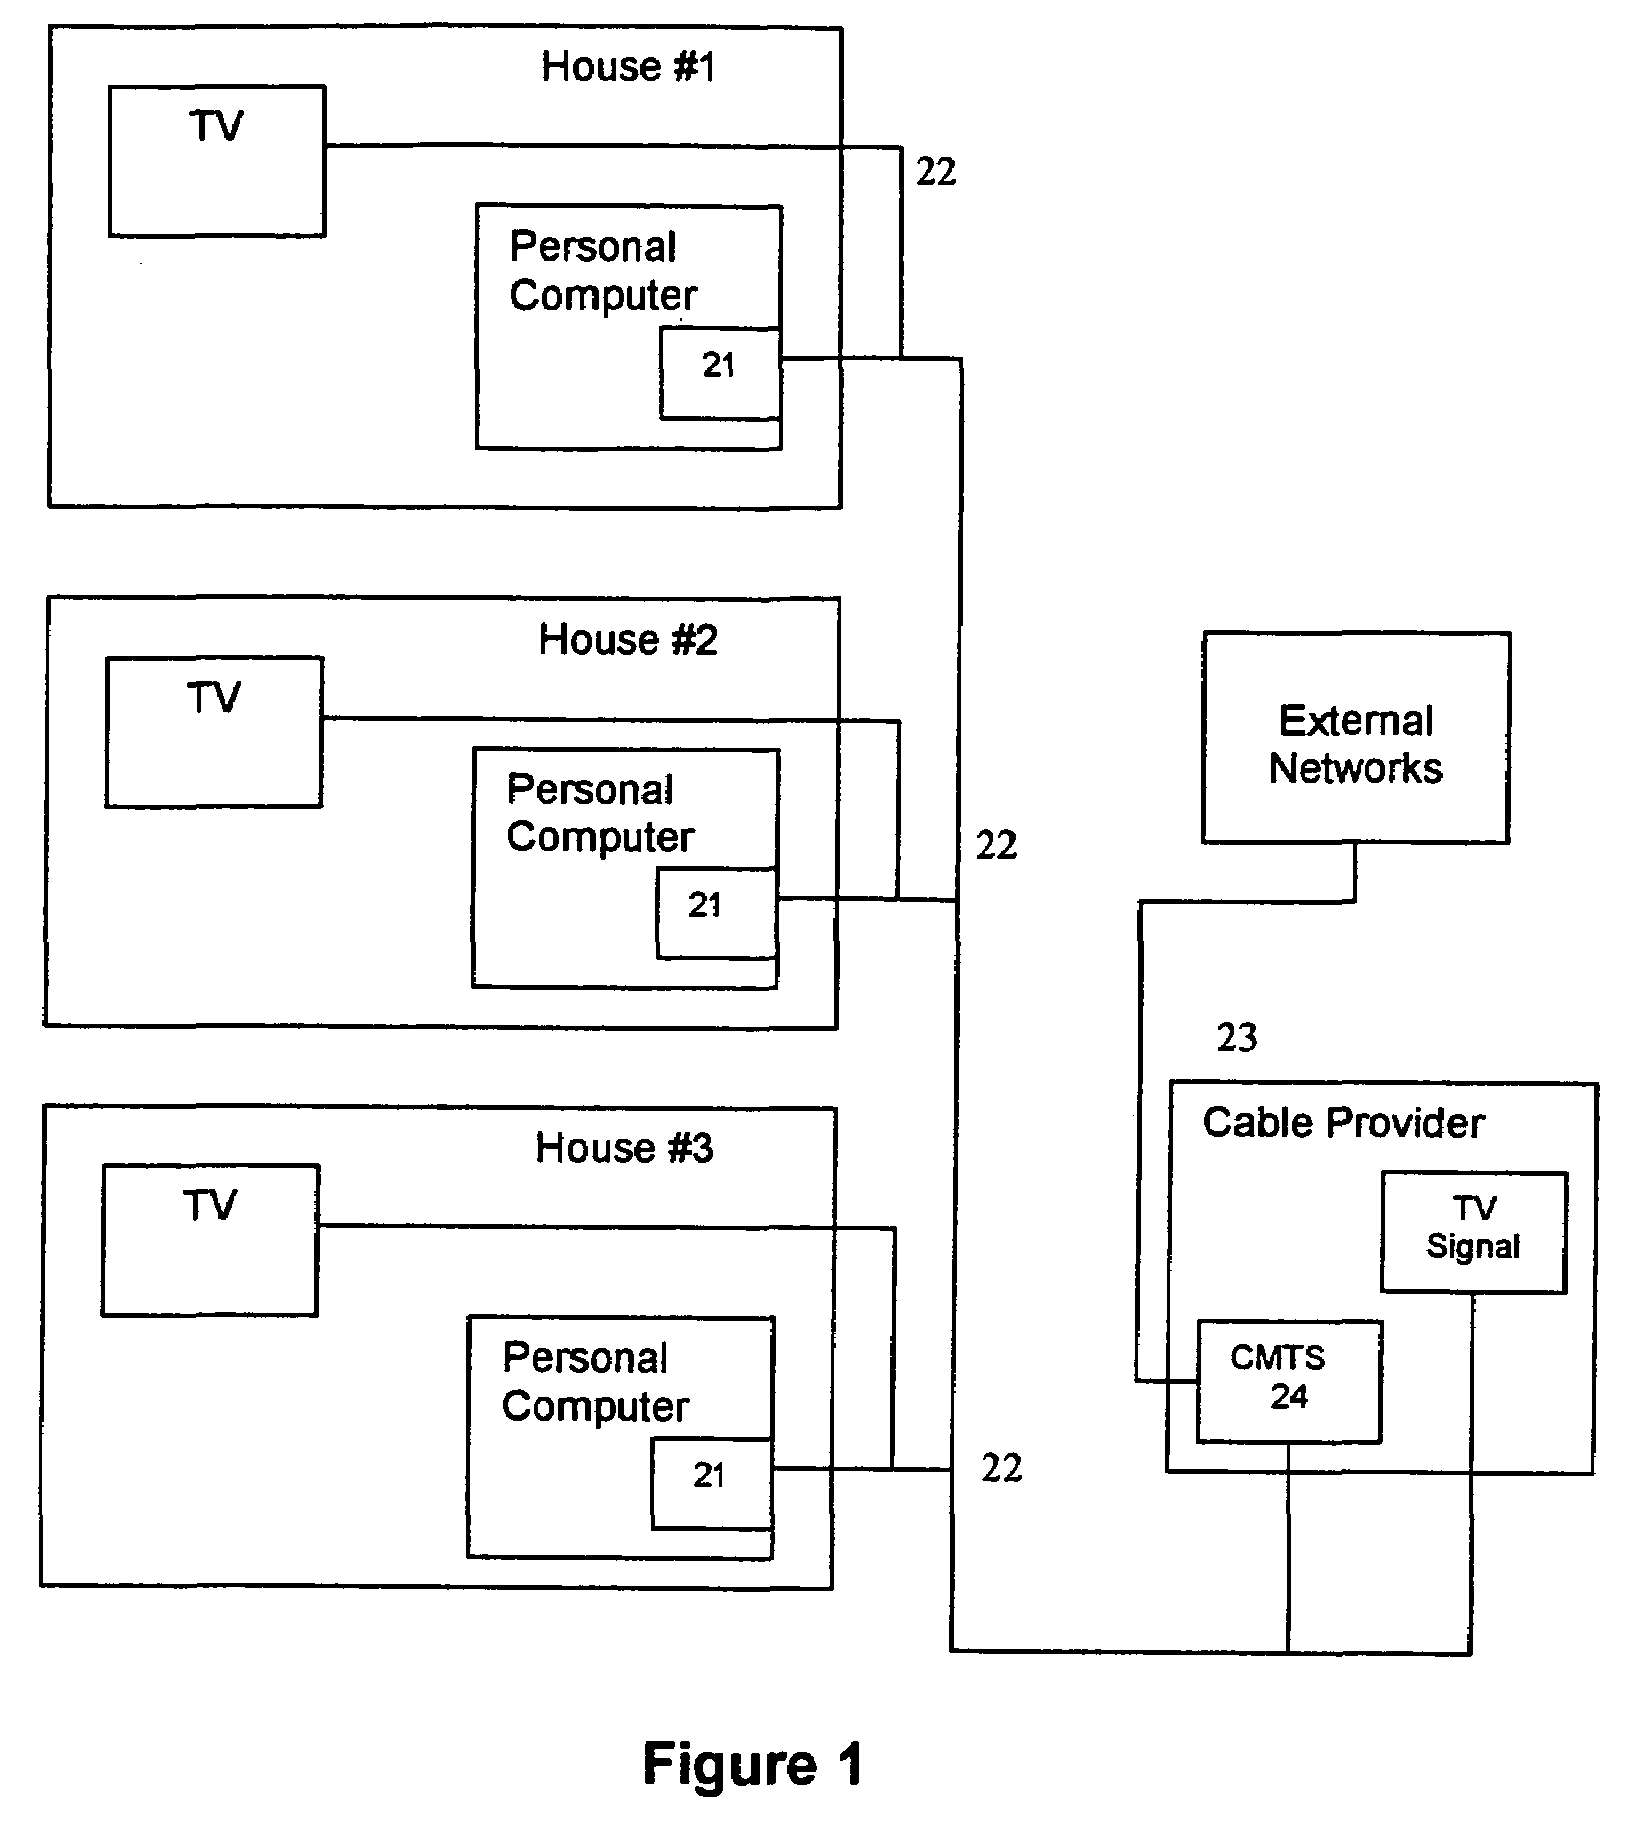 Cable modem termination system